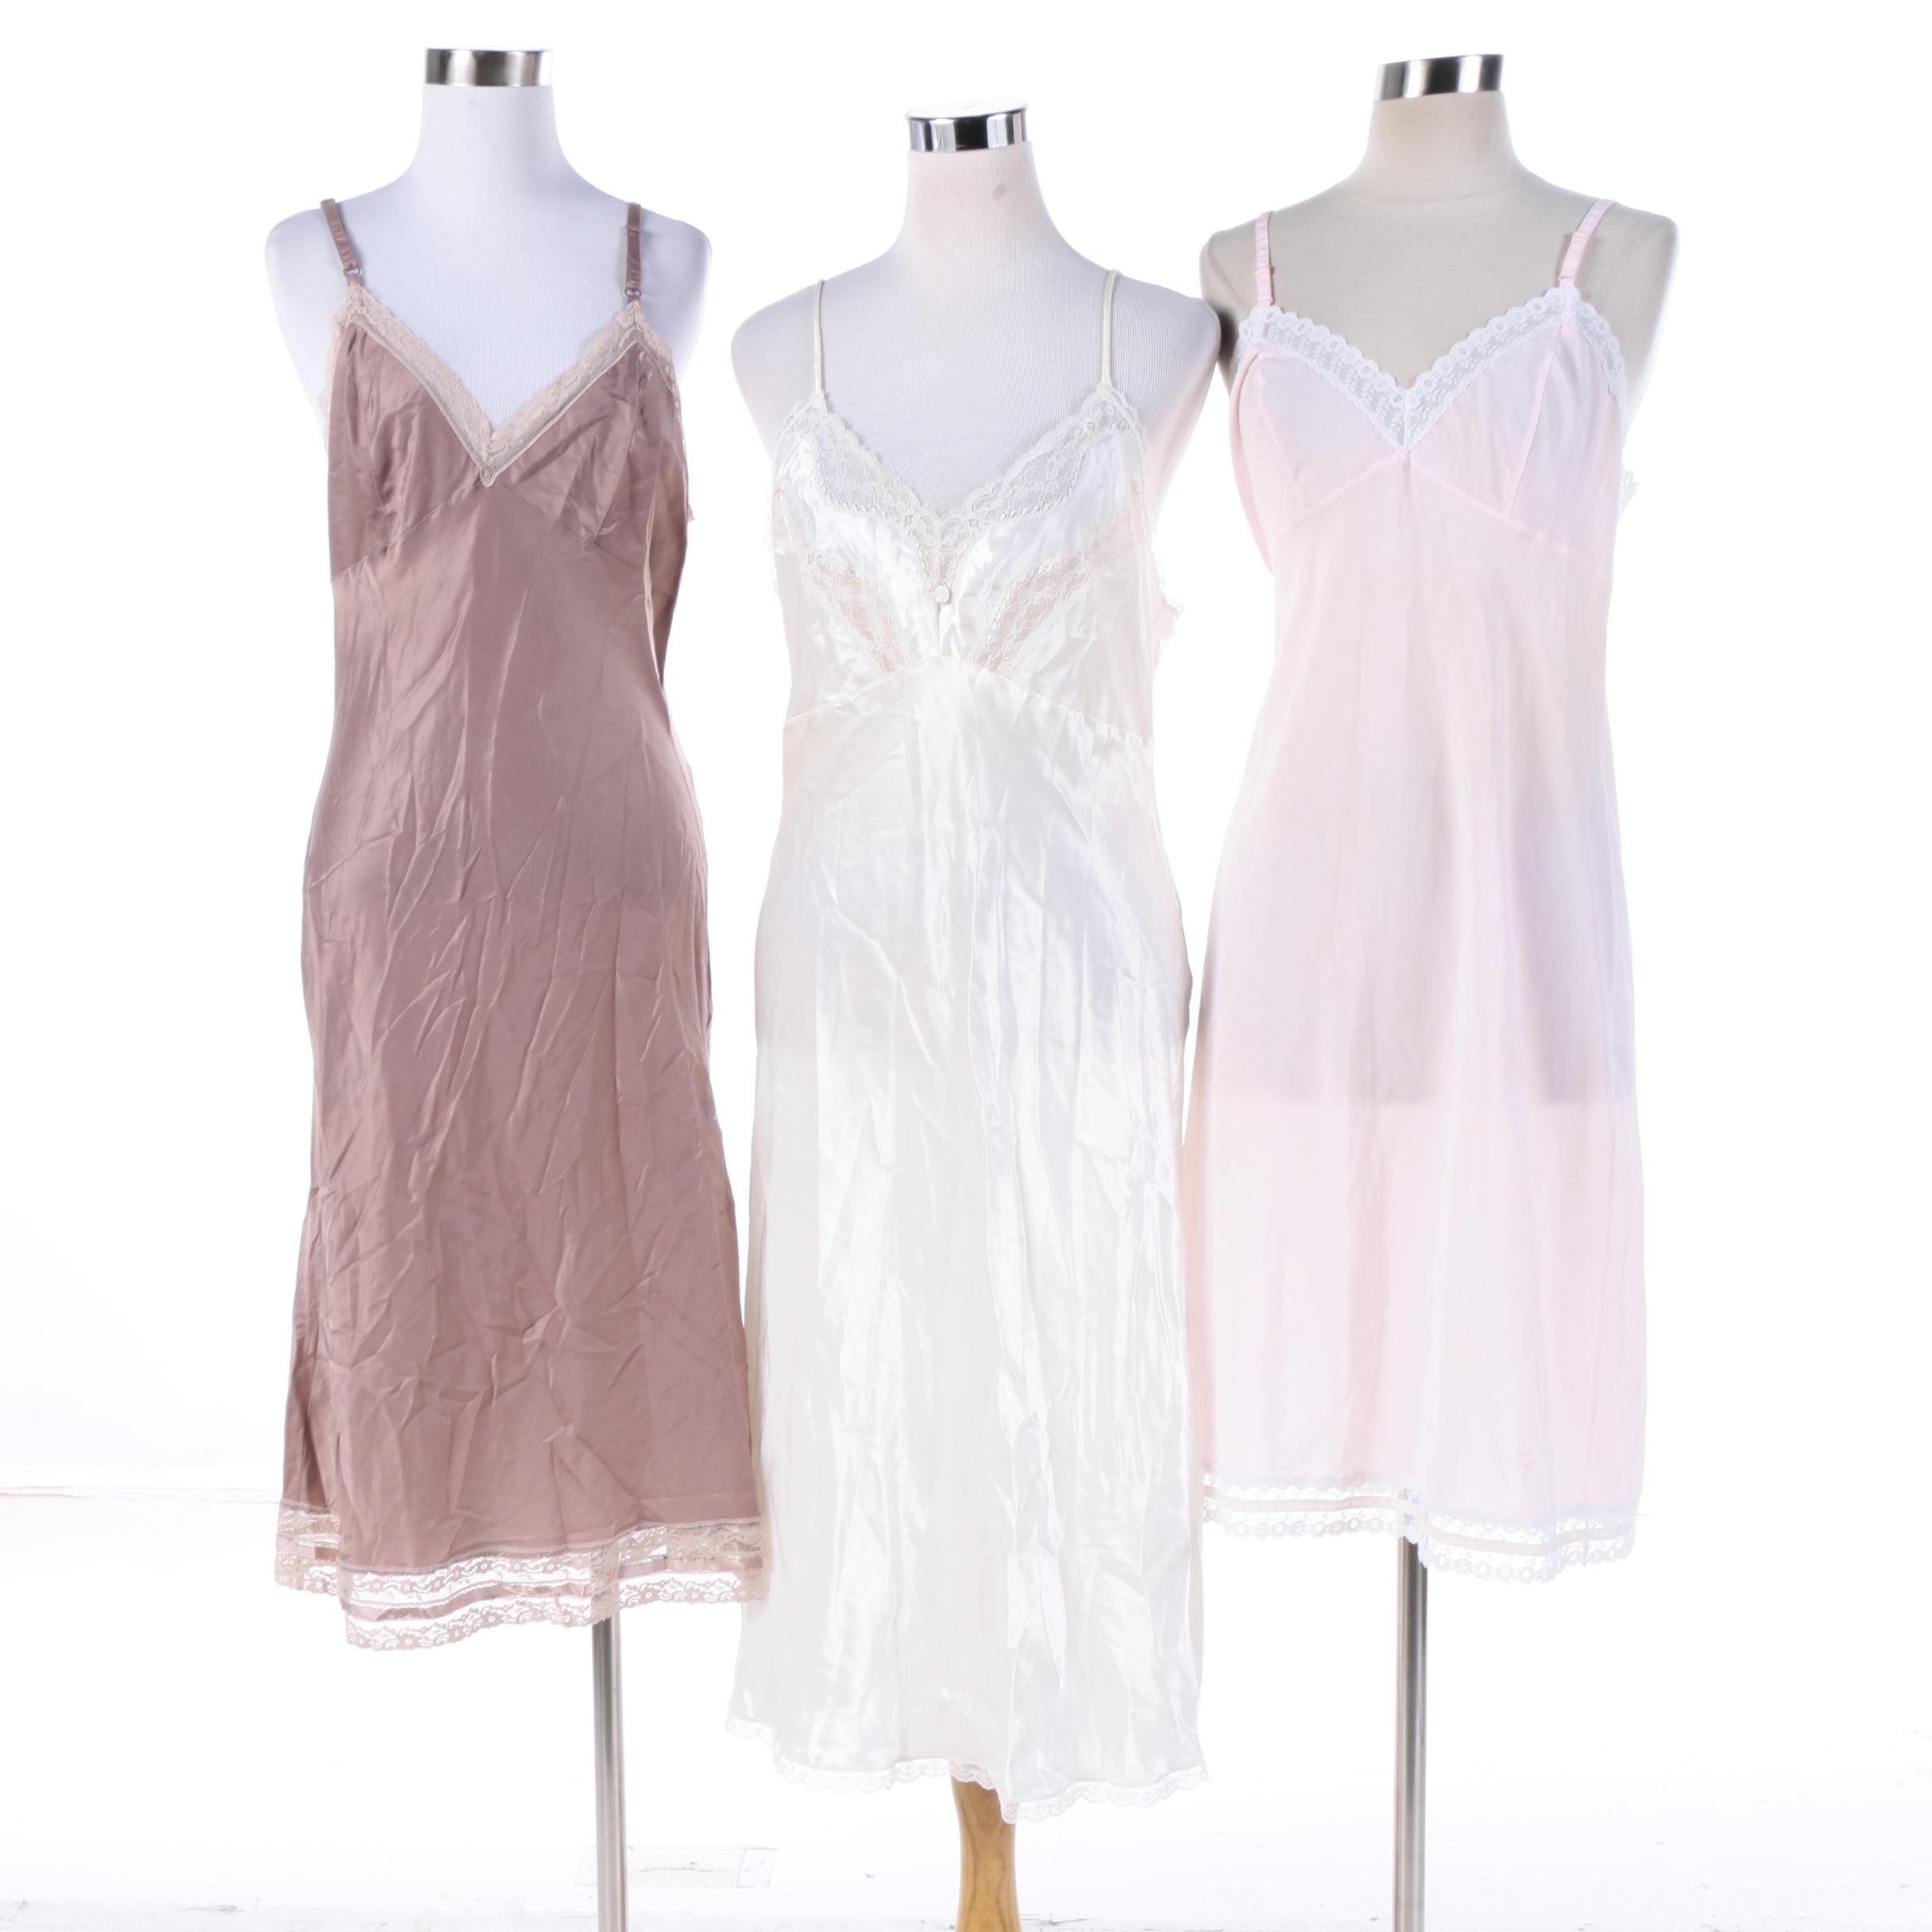 slip style nightgowns